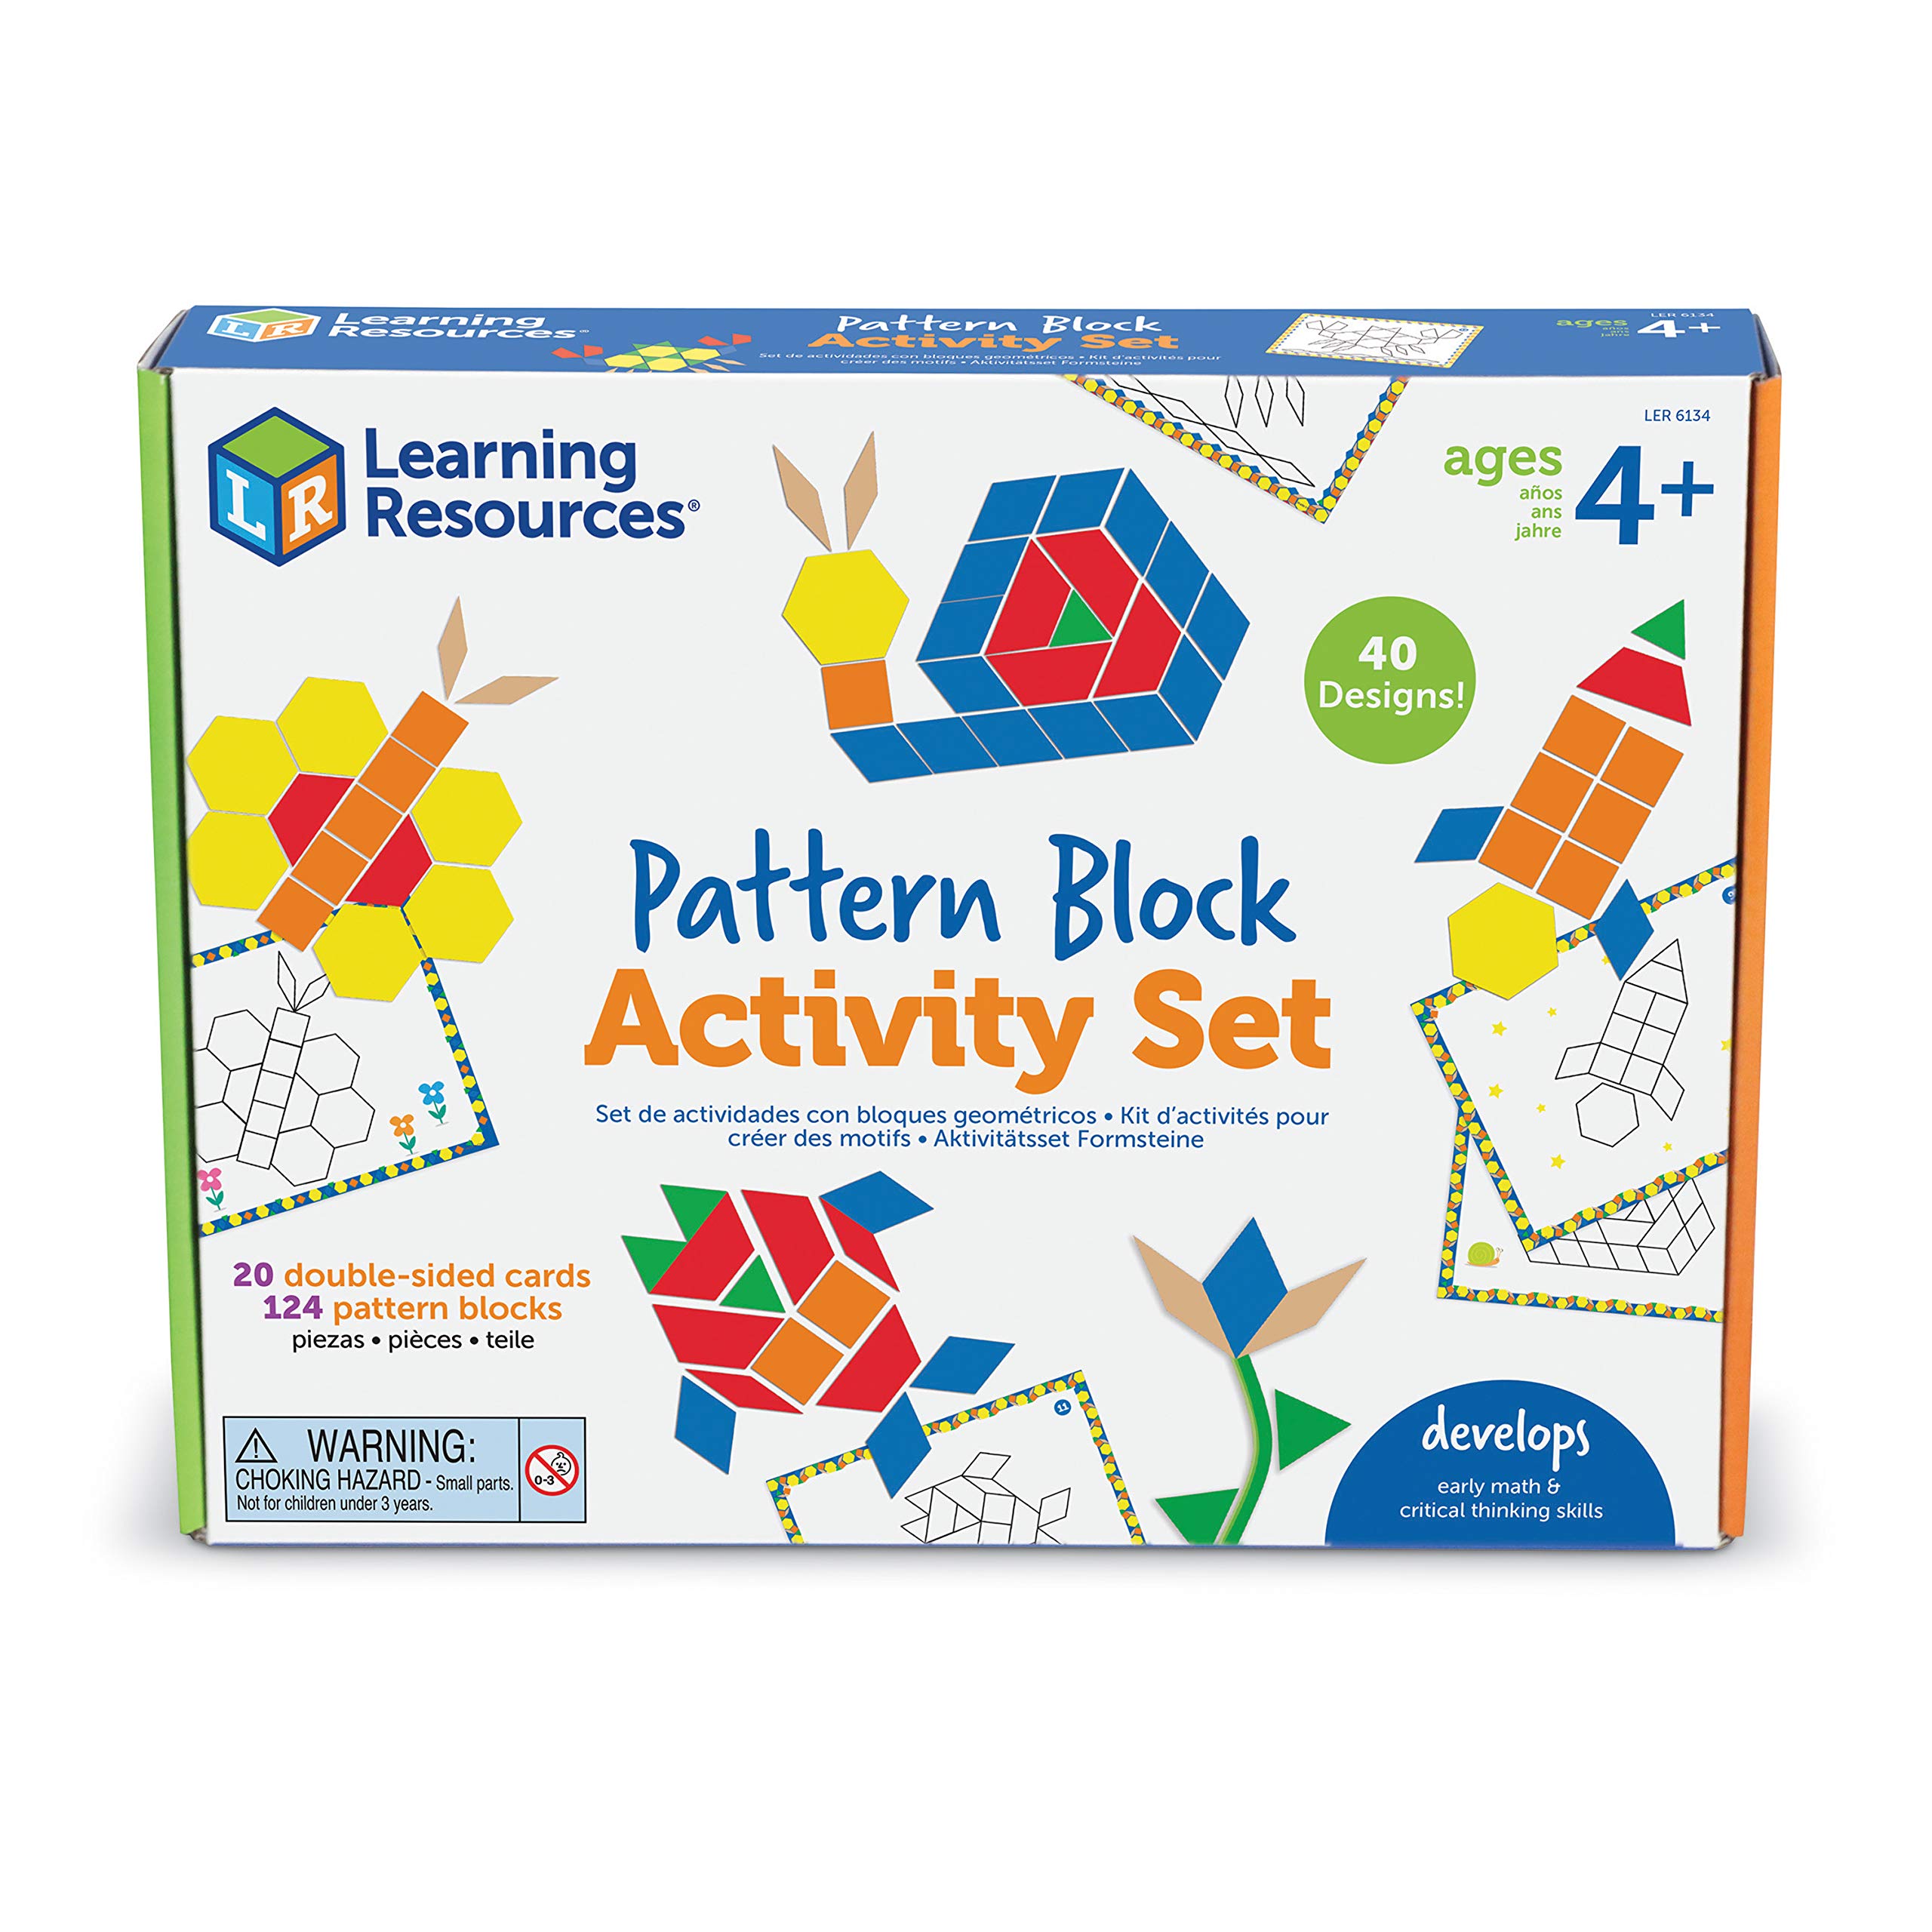 Learning Resources Pattern Block Activity Set, 20 Double-Sided cards, Puzzles for Kids, Easter gifts for Kids, Ages 4+